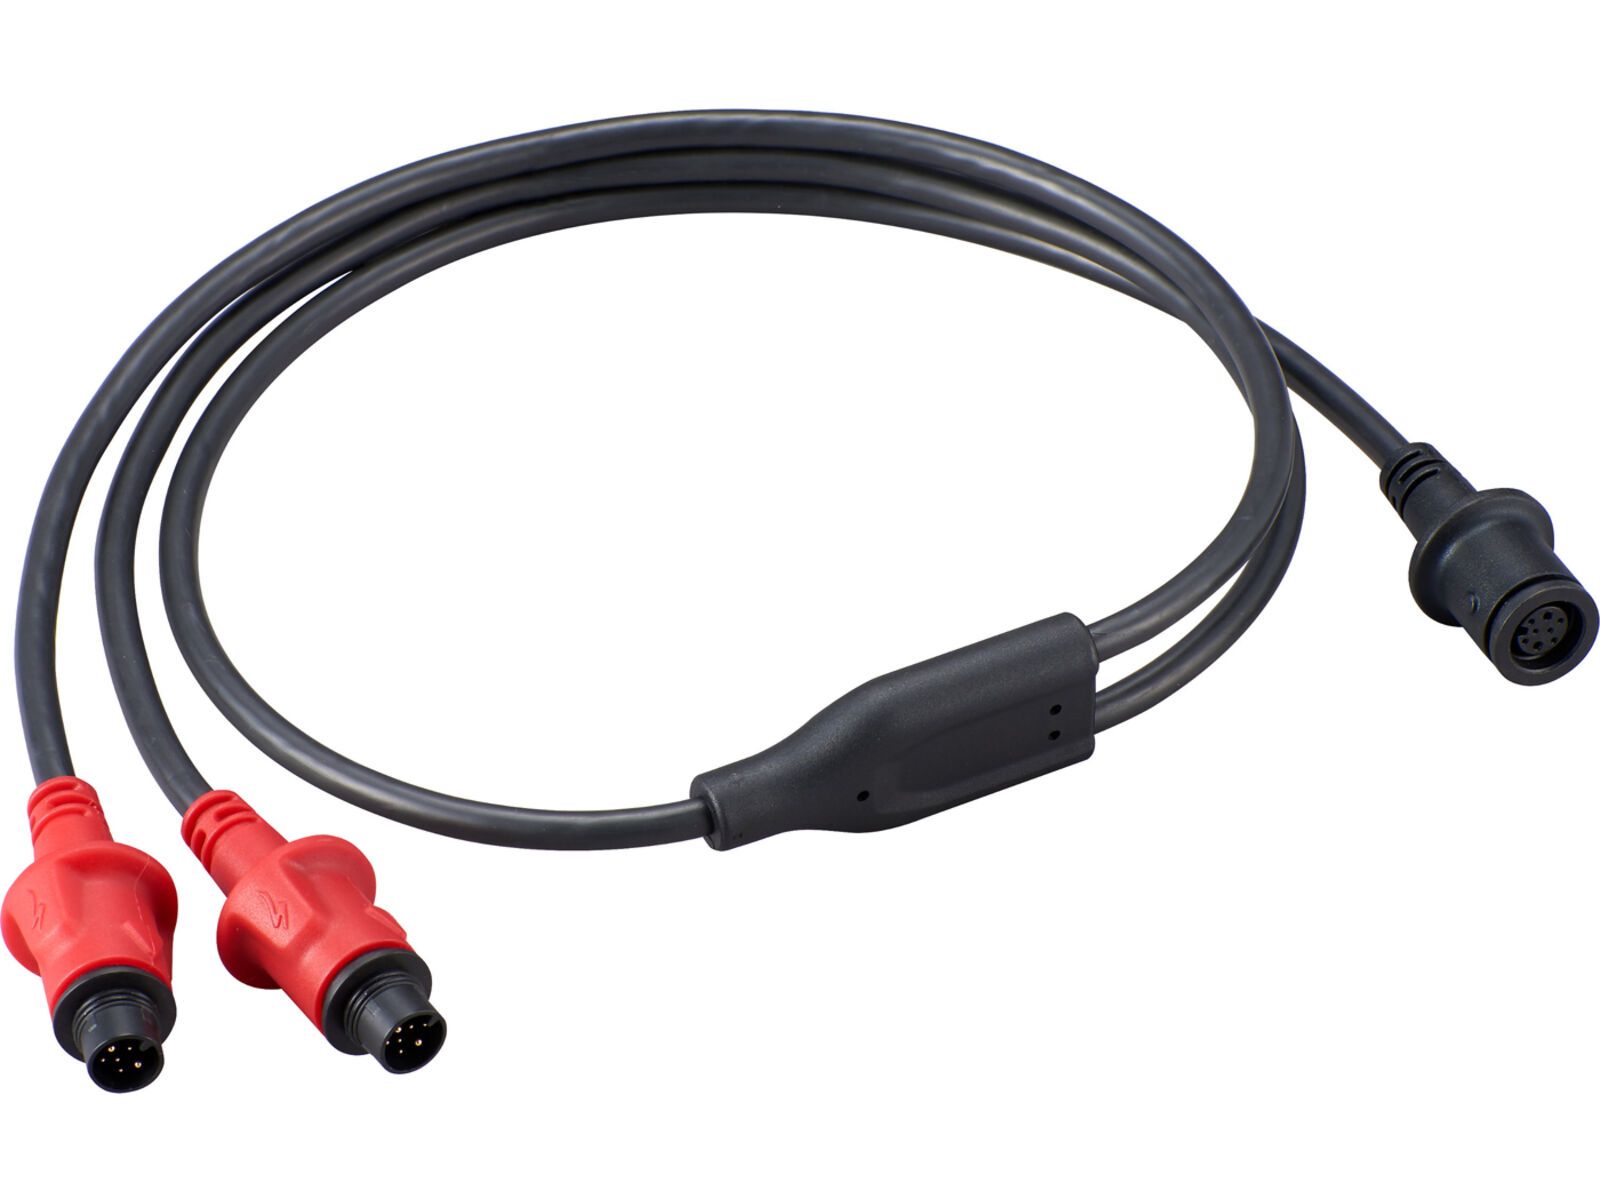 Specialized Turbo SL Y Charger Cable - Ladekabel | Bild 1